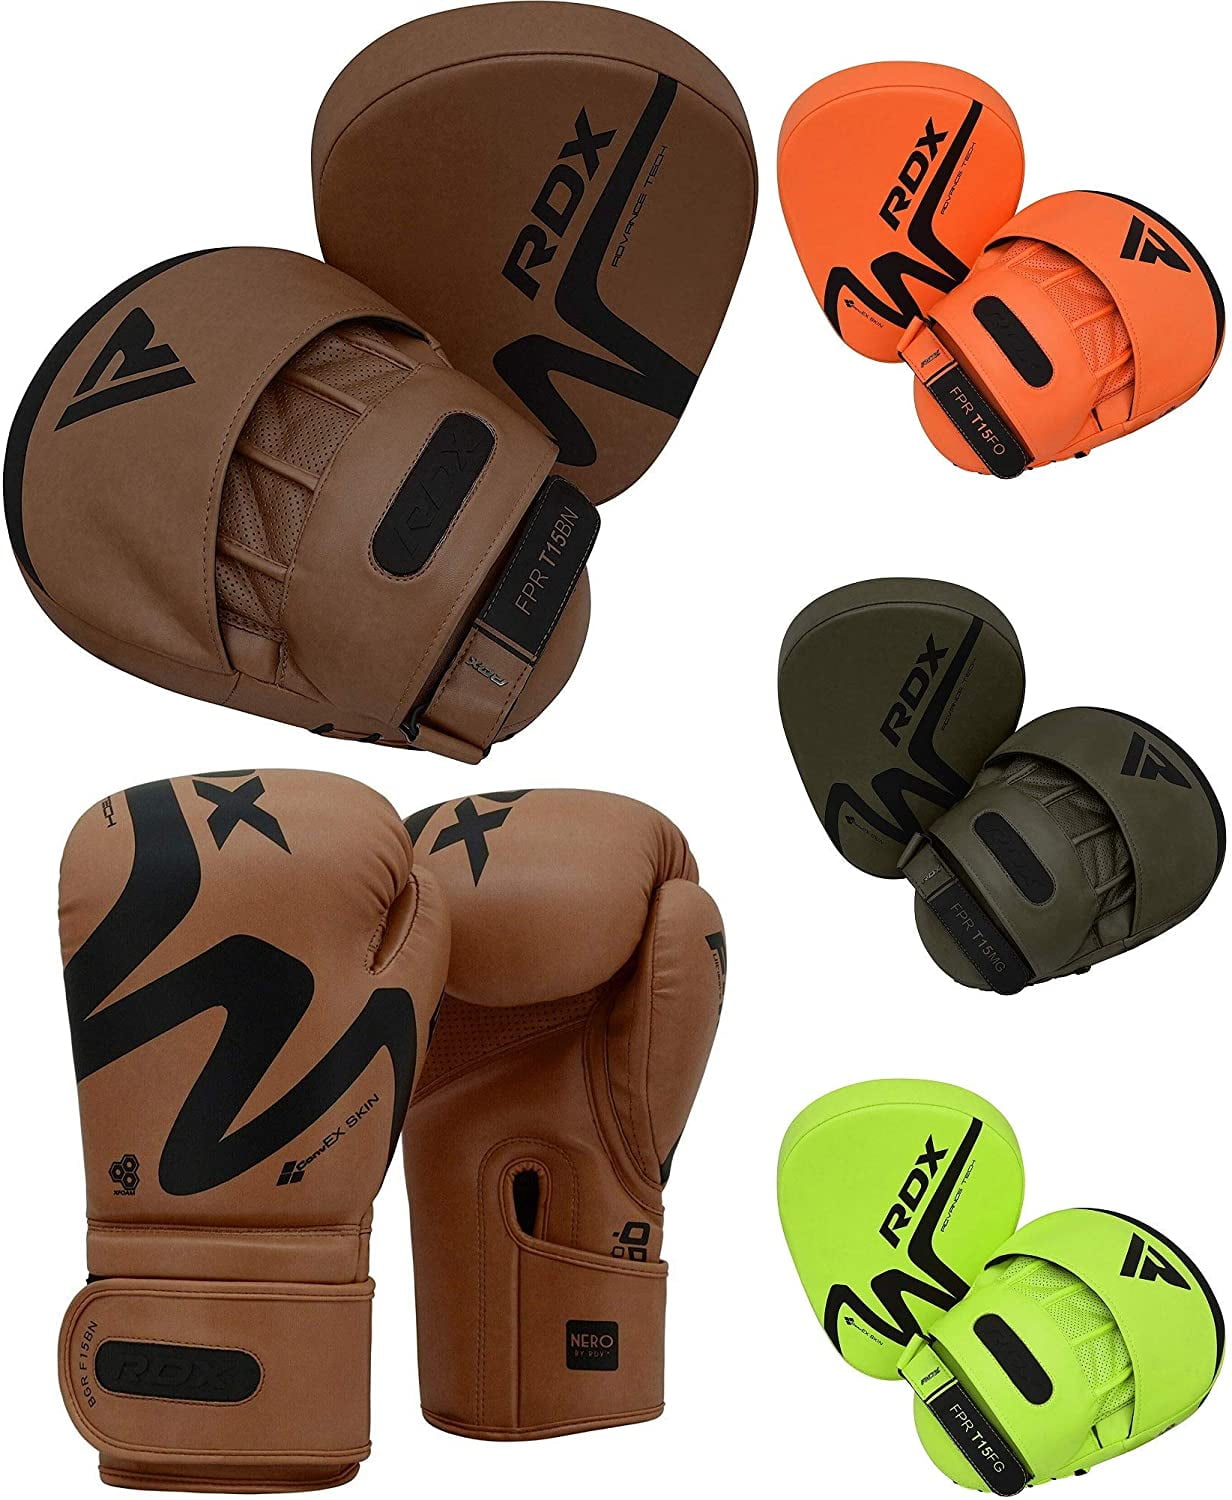 RDX Boxing Focus Pads Hook & Jab Mitts Thai Kick MMA Training Punch Bag Curved W 